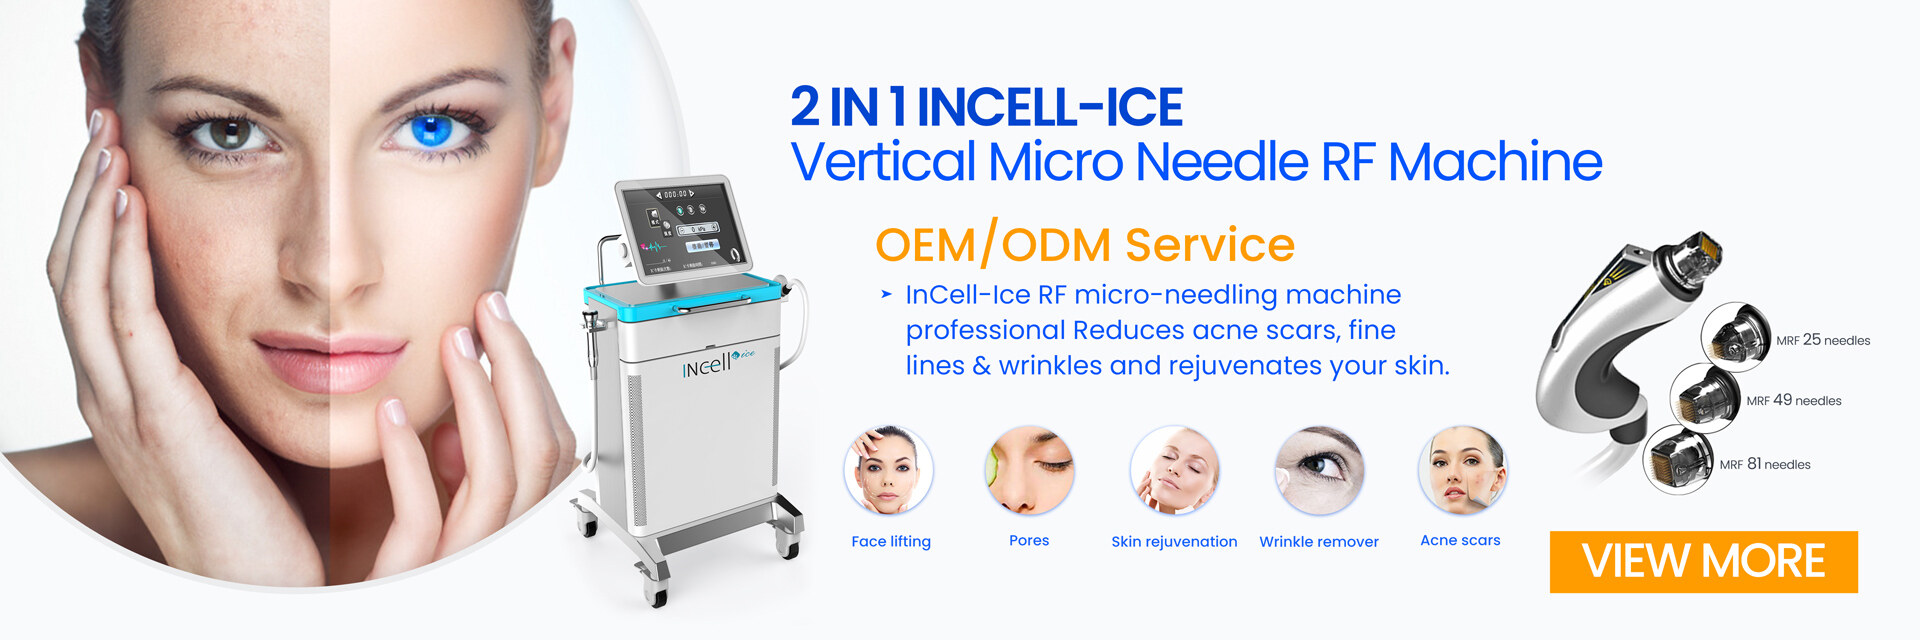 Advanced HIFU Machine for Professional Use High-Performance HIFU Machines for Skin Tightening for Sale,Best Microneedling Device for Home and Professional Use for Effective Skin Treatment,Advanced RF Microneedling Machine for Skin Rejuvenation High-Performance RF Microneedling Devices for Professionals for Sale